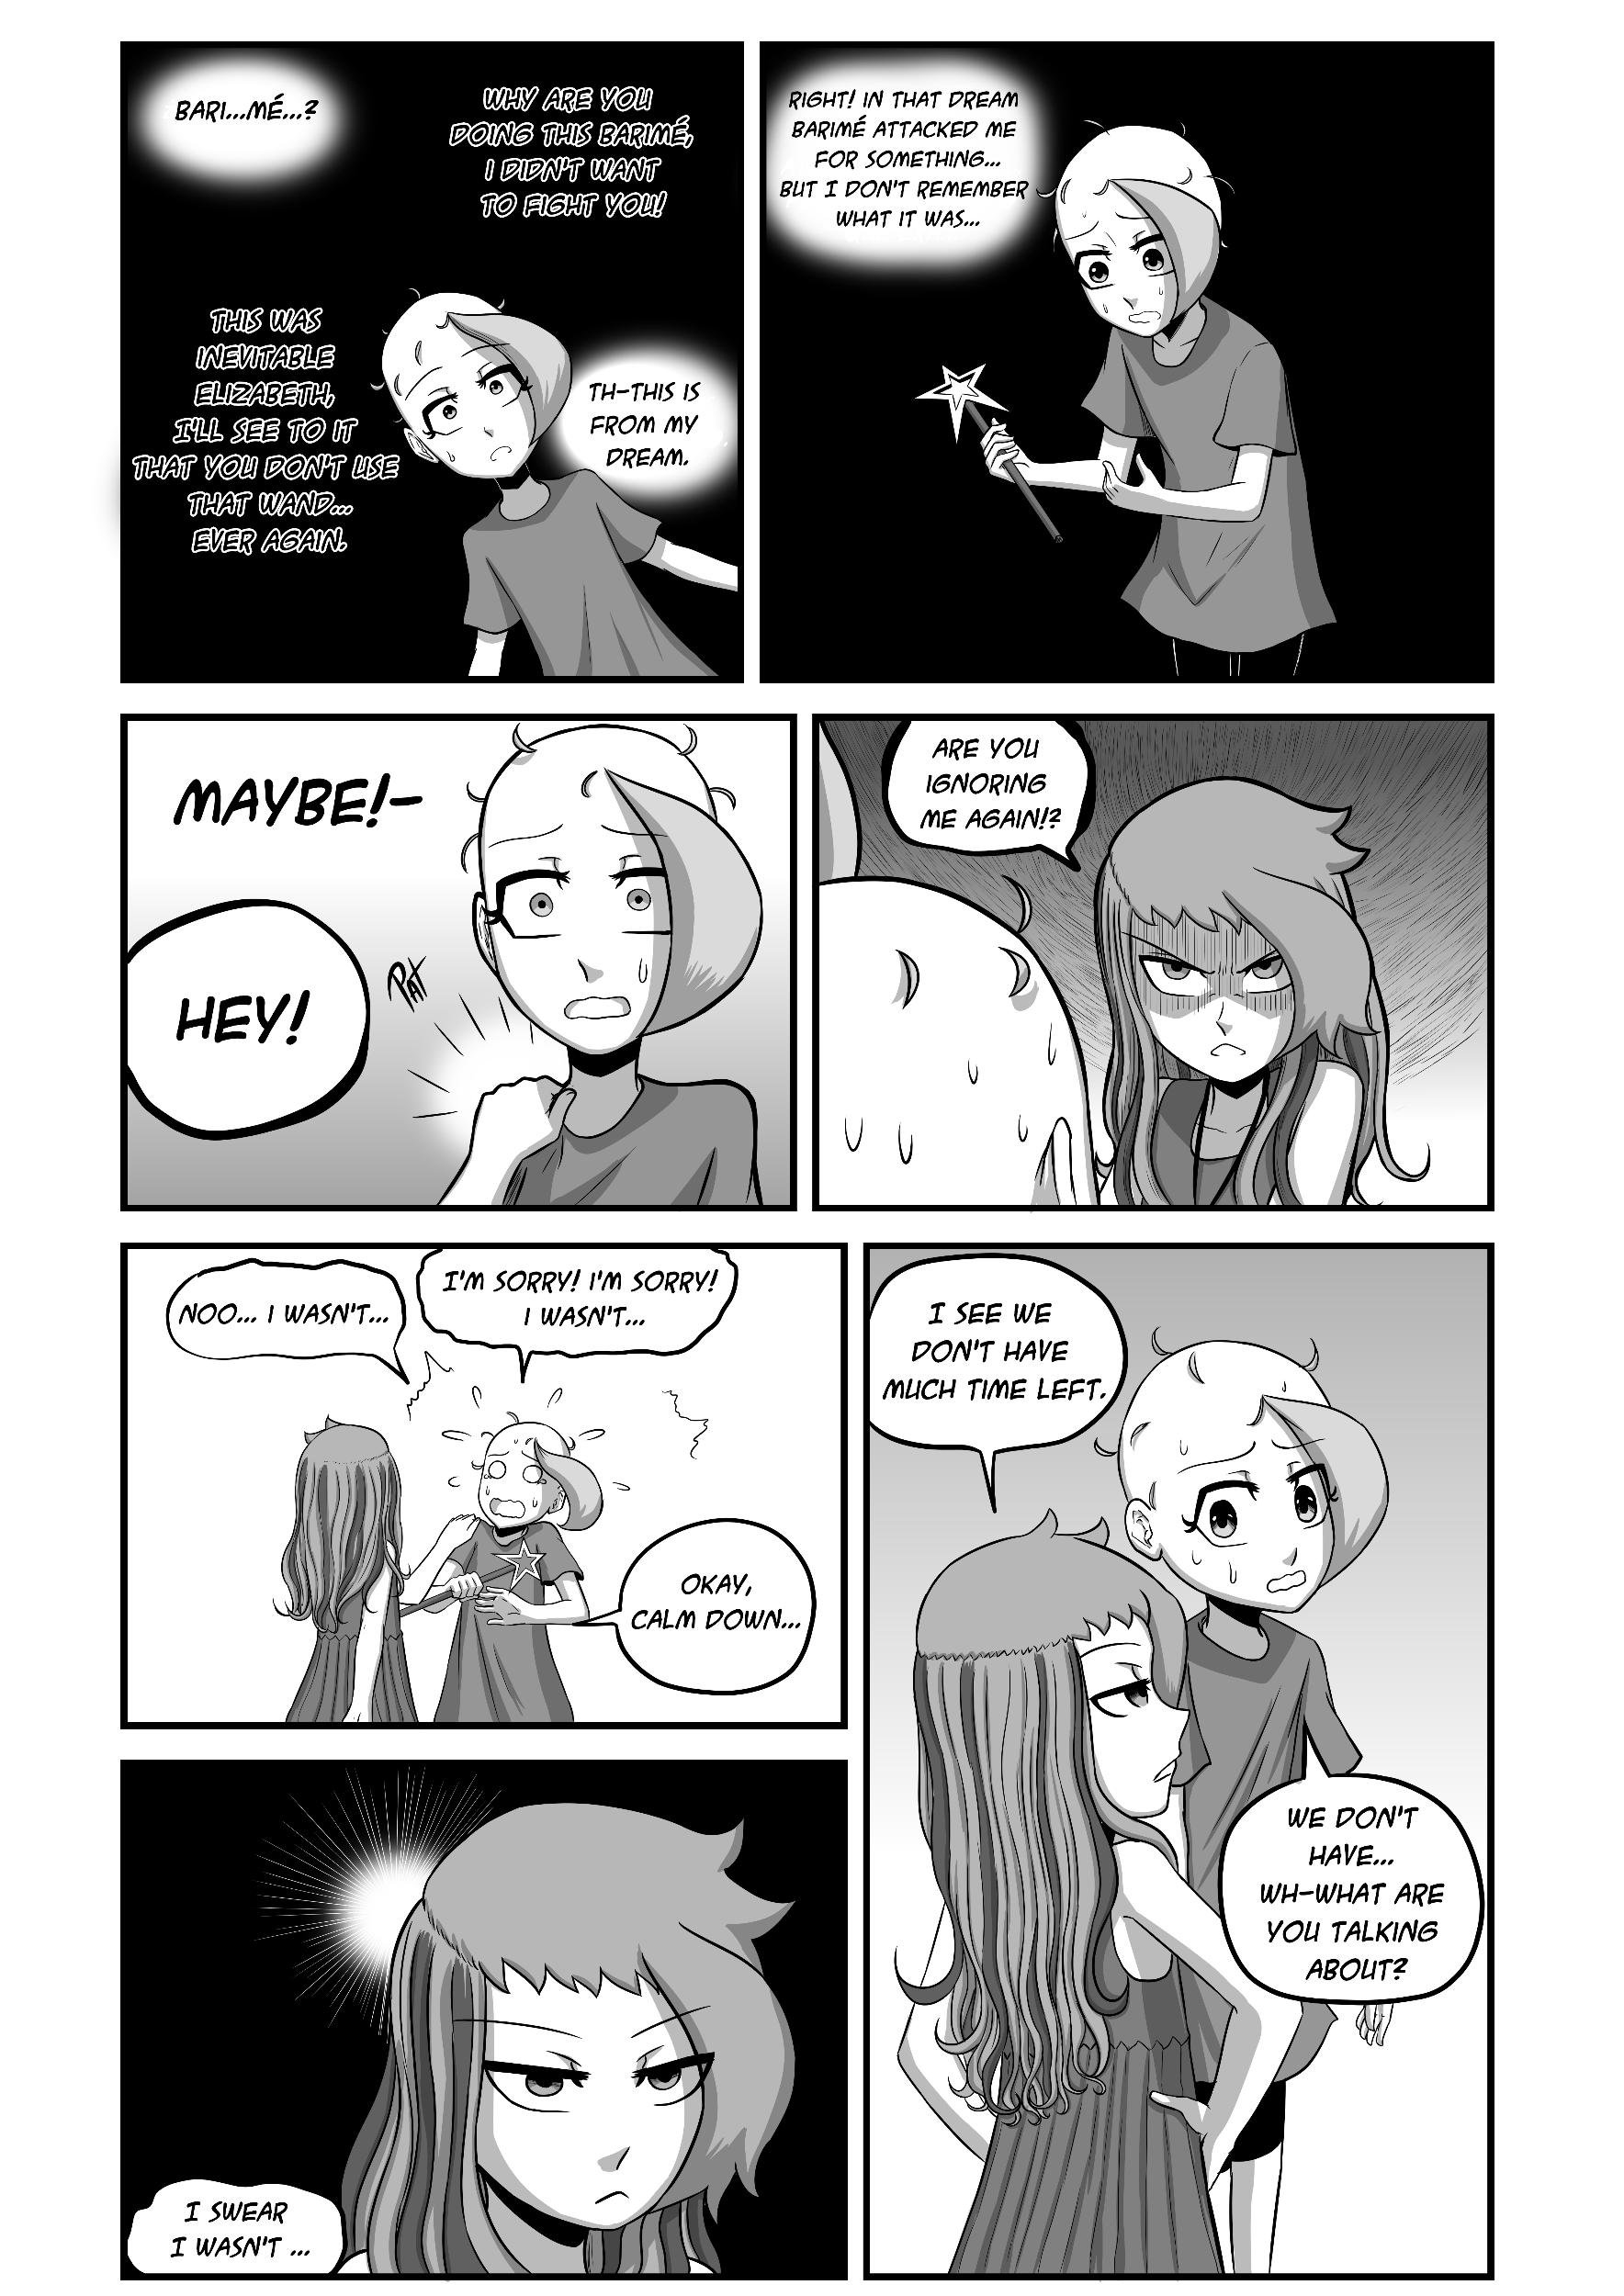 PAGE 24